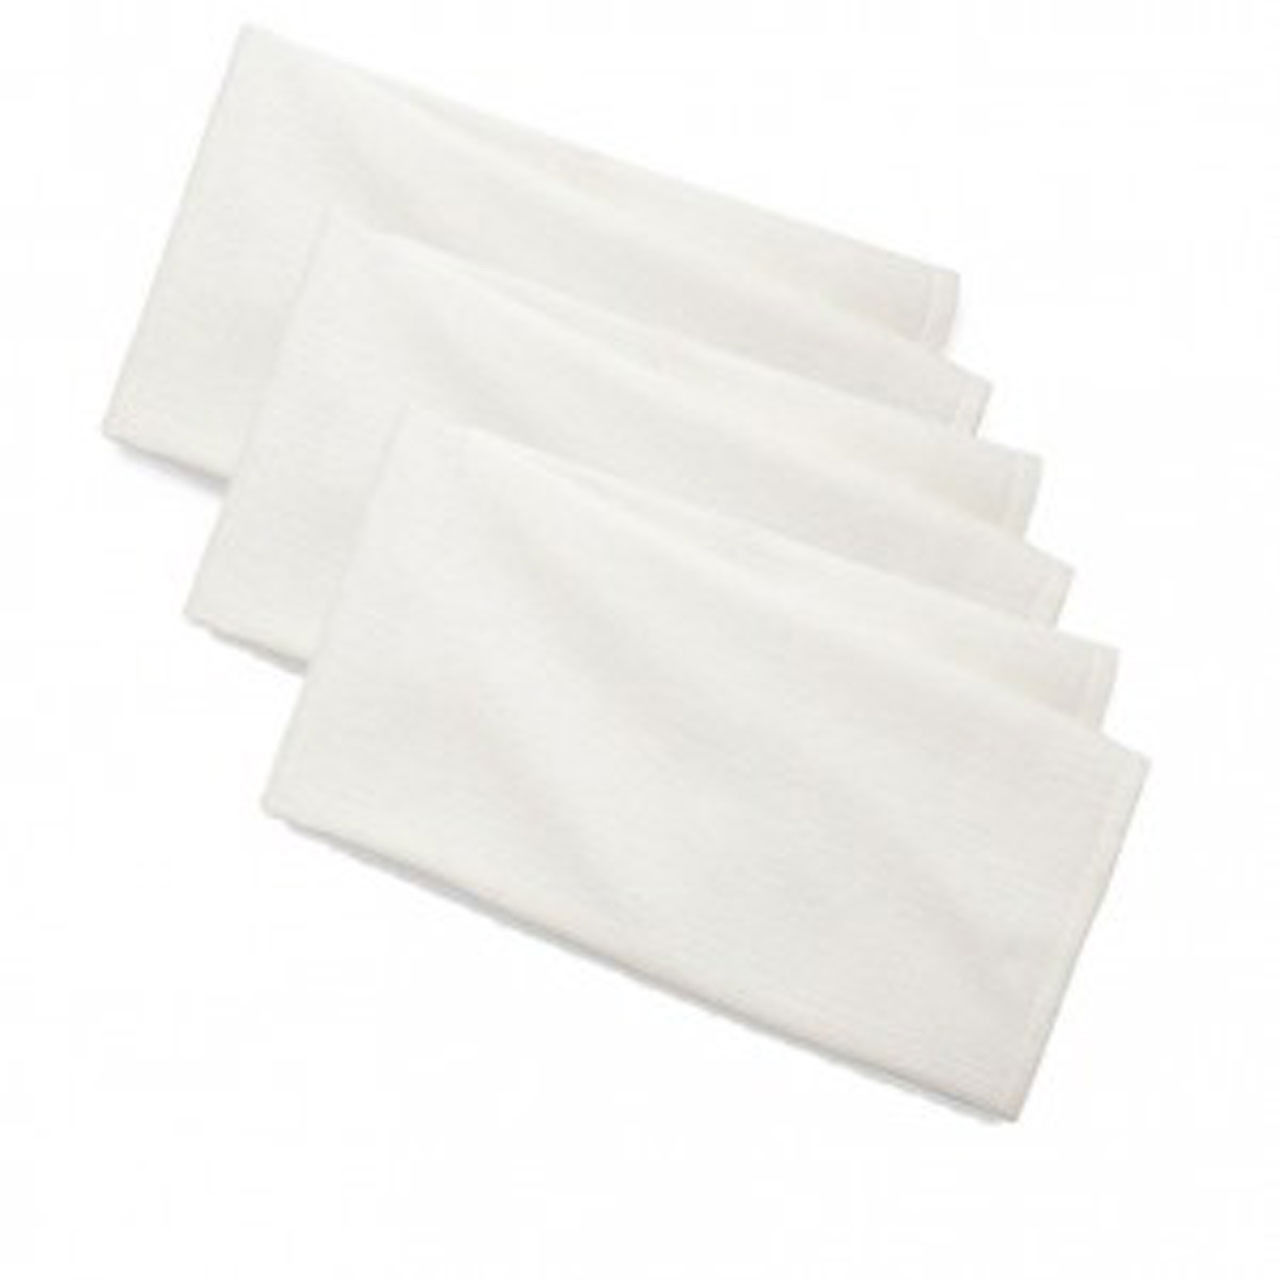 What are the best ways to utilize huck towels?